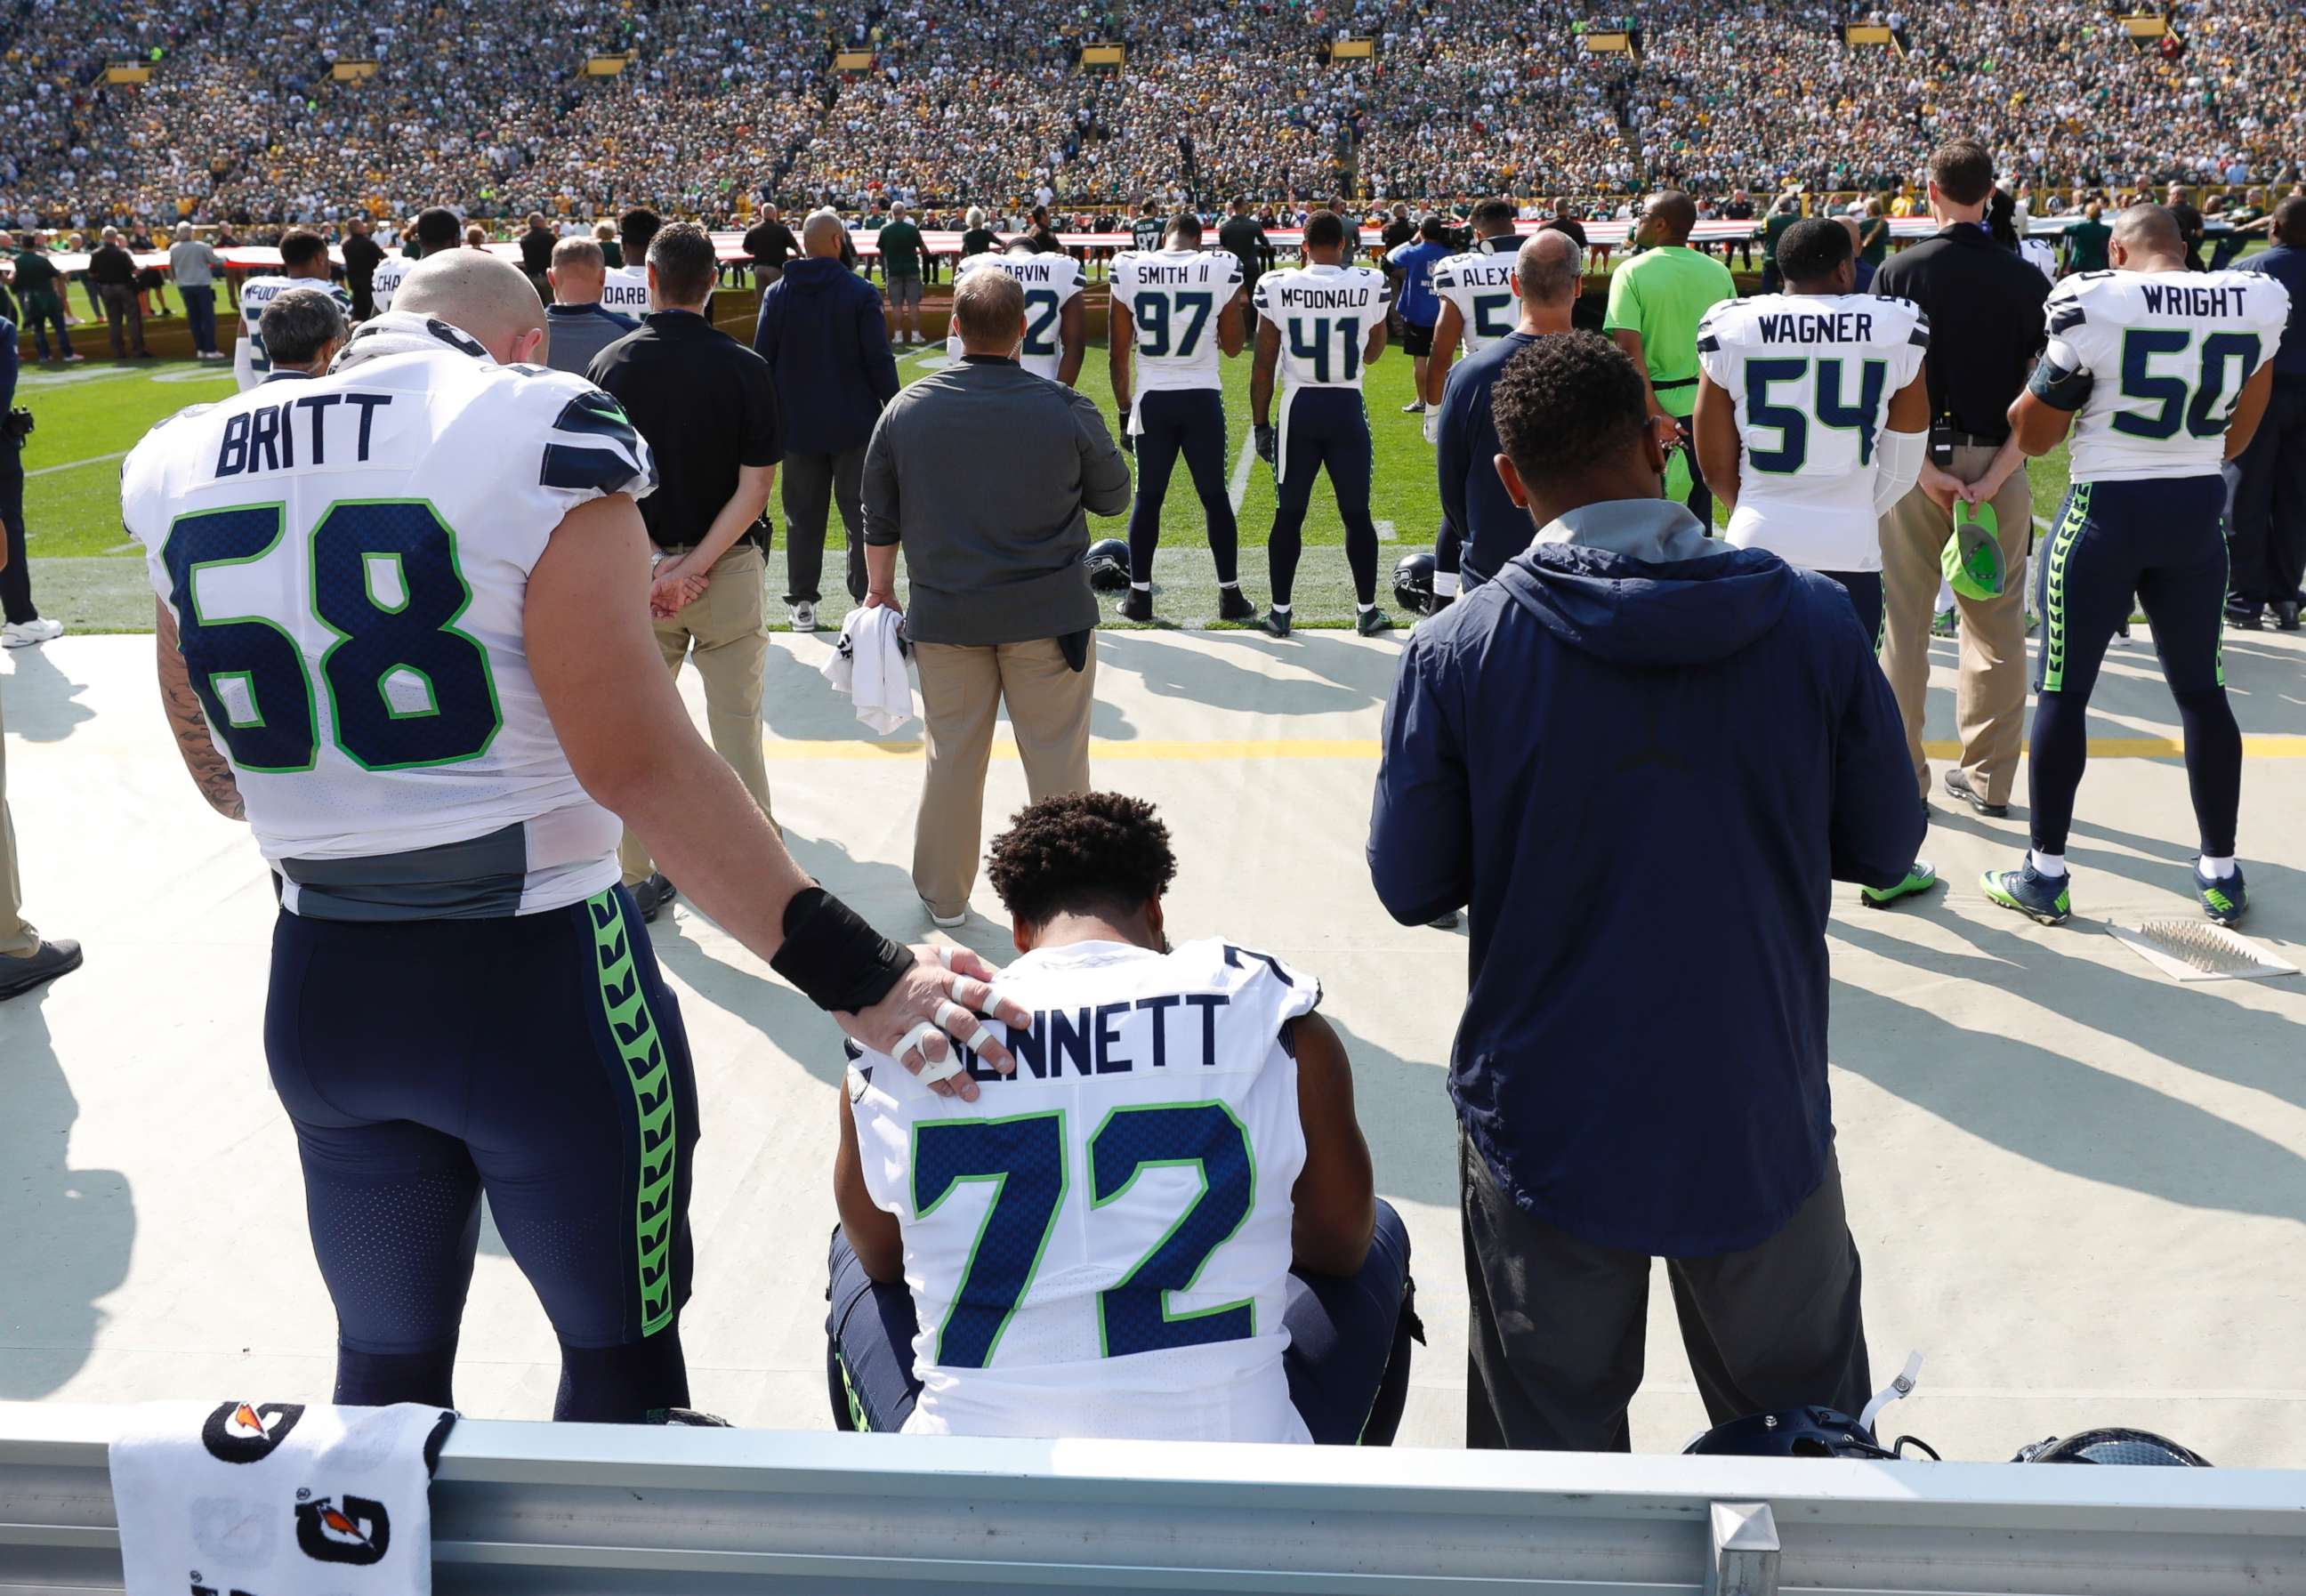 PHOTO: Seattle Seahawks' Michael Bennett remains seated on the bench during the national anthem before an NFL football game against the Green Bay Packers Sunday, Sept. 10, 2017, in Green Bay, Wis.